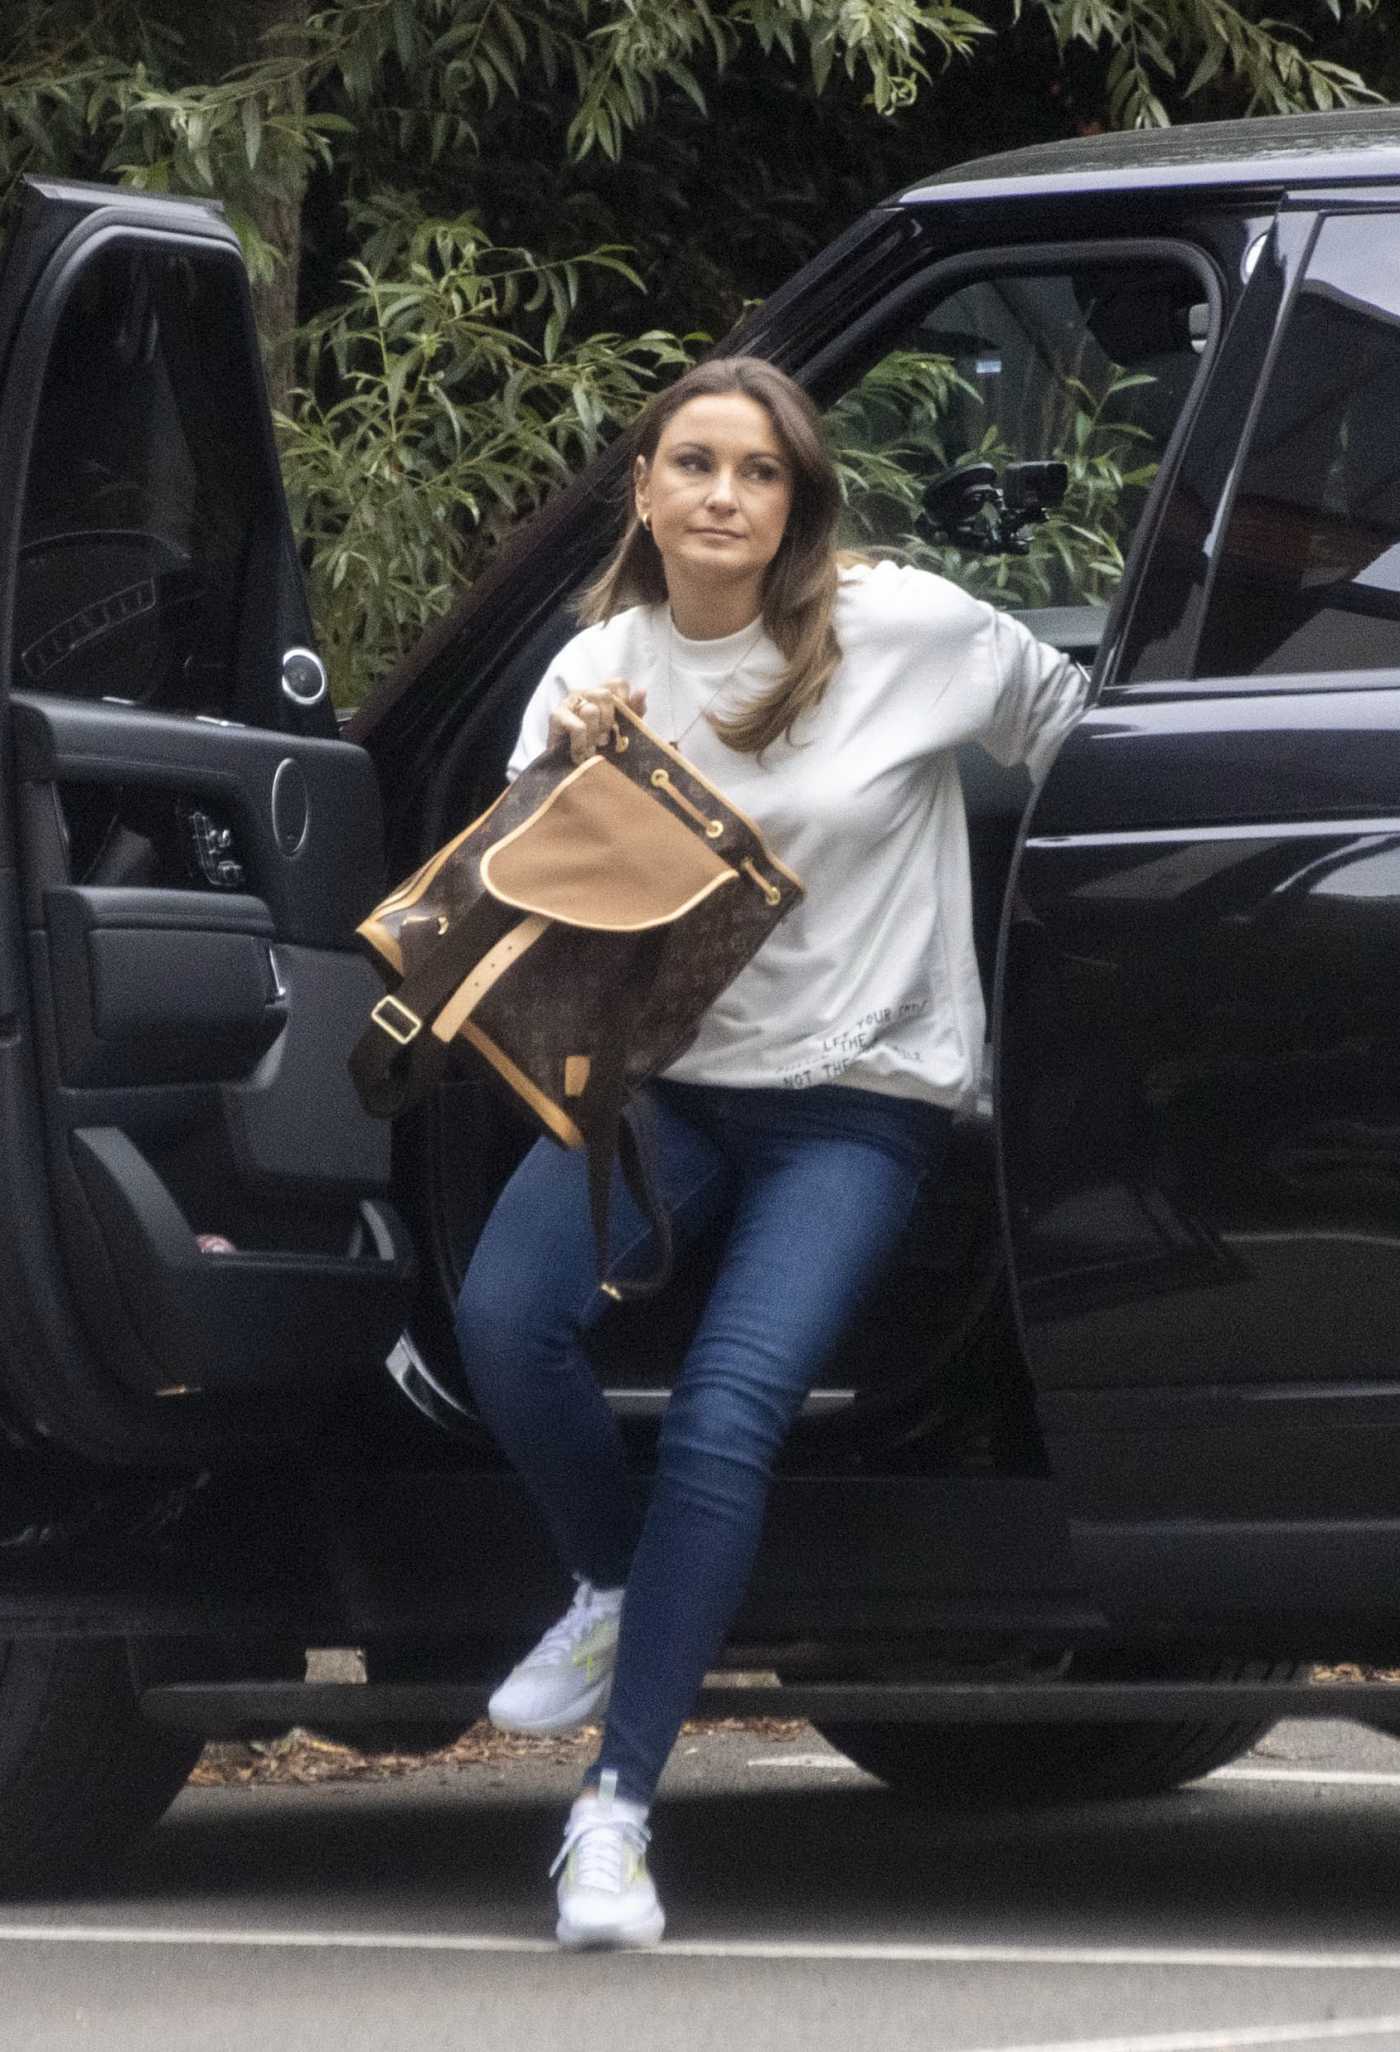 Sam Faiers in a White Sweatshirt Arrives on the Set of The Mummy Diaries in London 08/17/2020